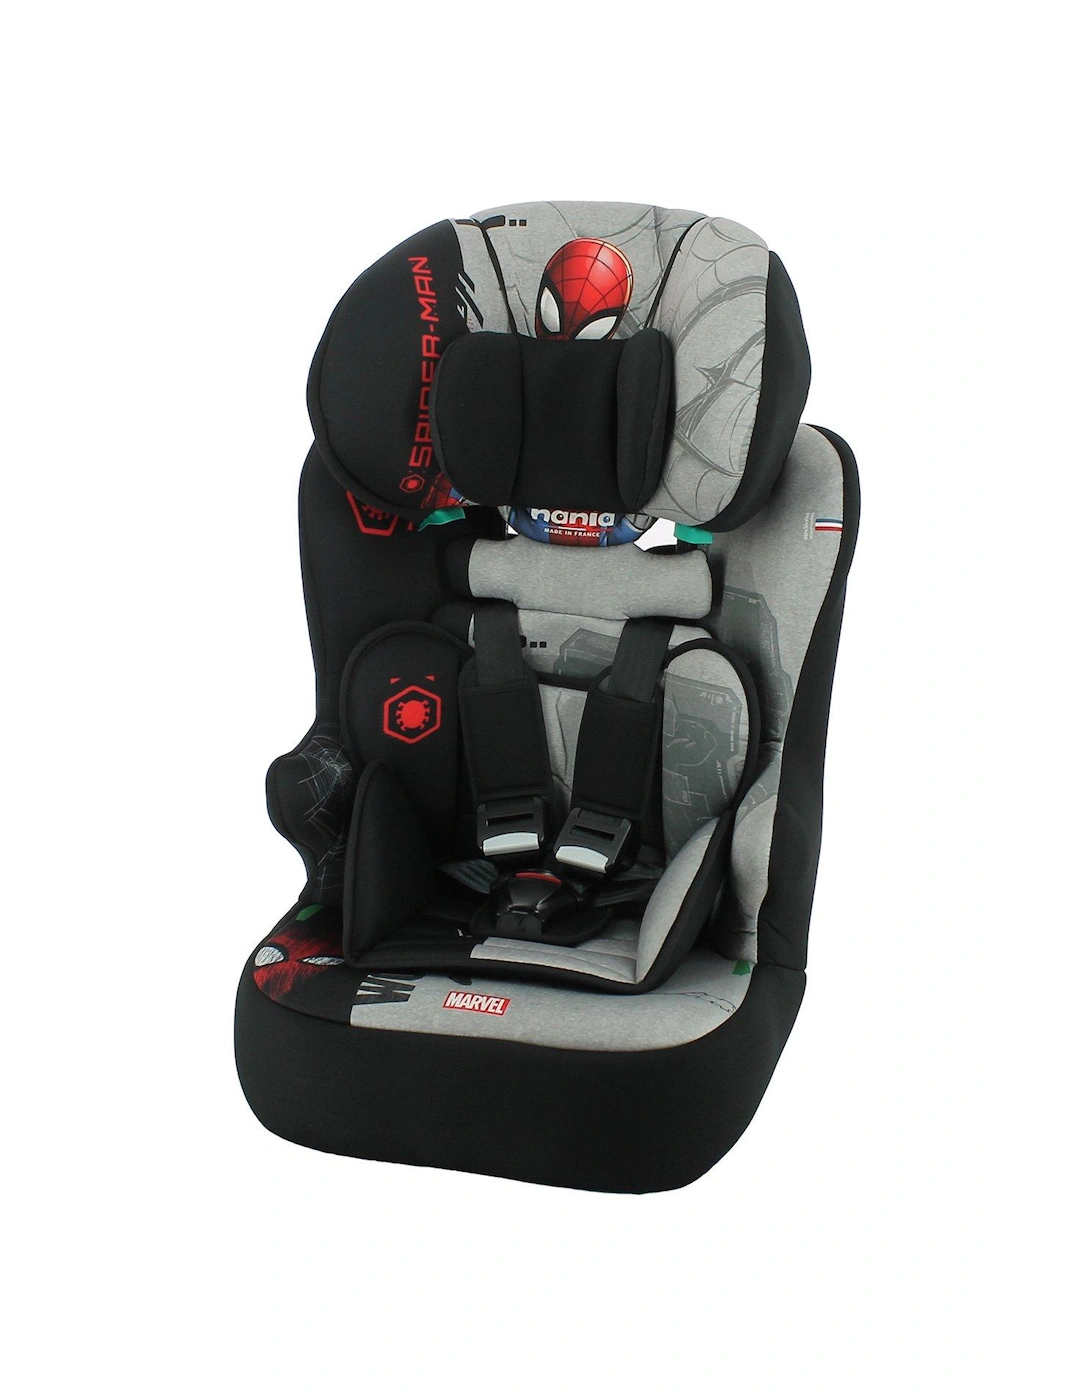 Race I Belt fitted High Back Booster Car Seat - 76-140cm (approx. 9 months to 12 years), 2 of 1